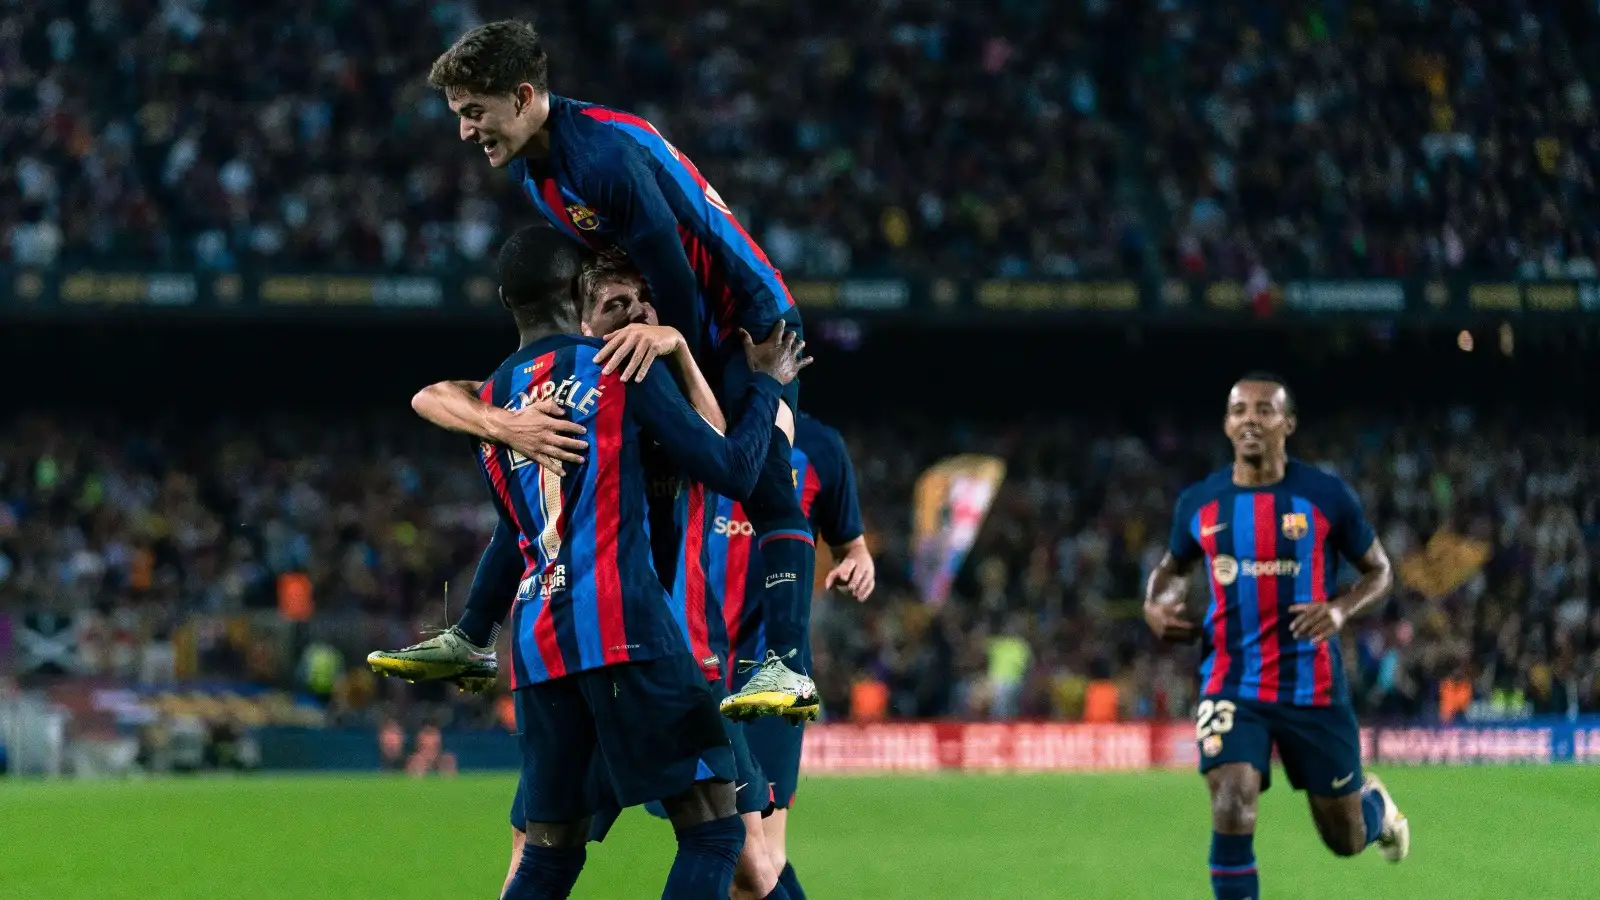 10 insane stats from Barcelona’s superb 4-0 thrashing of Athletic Club